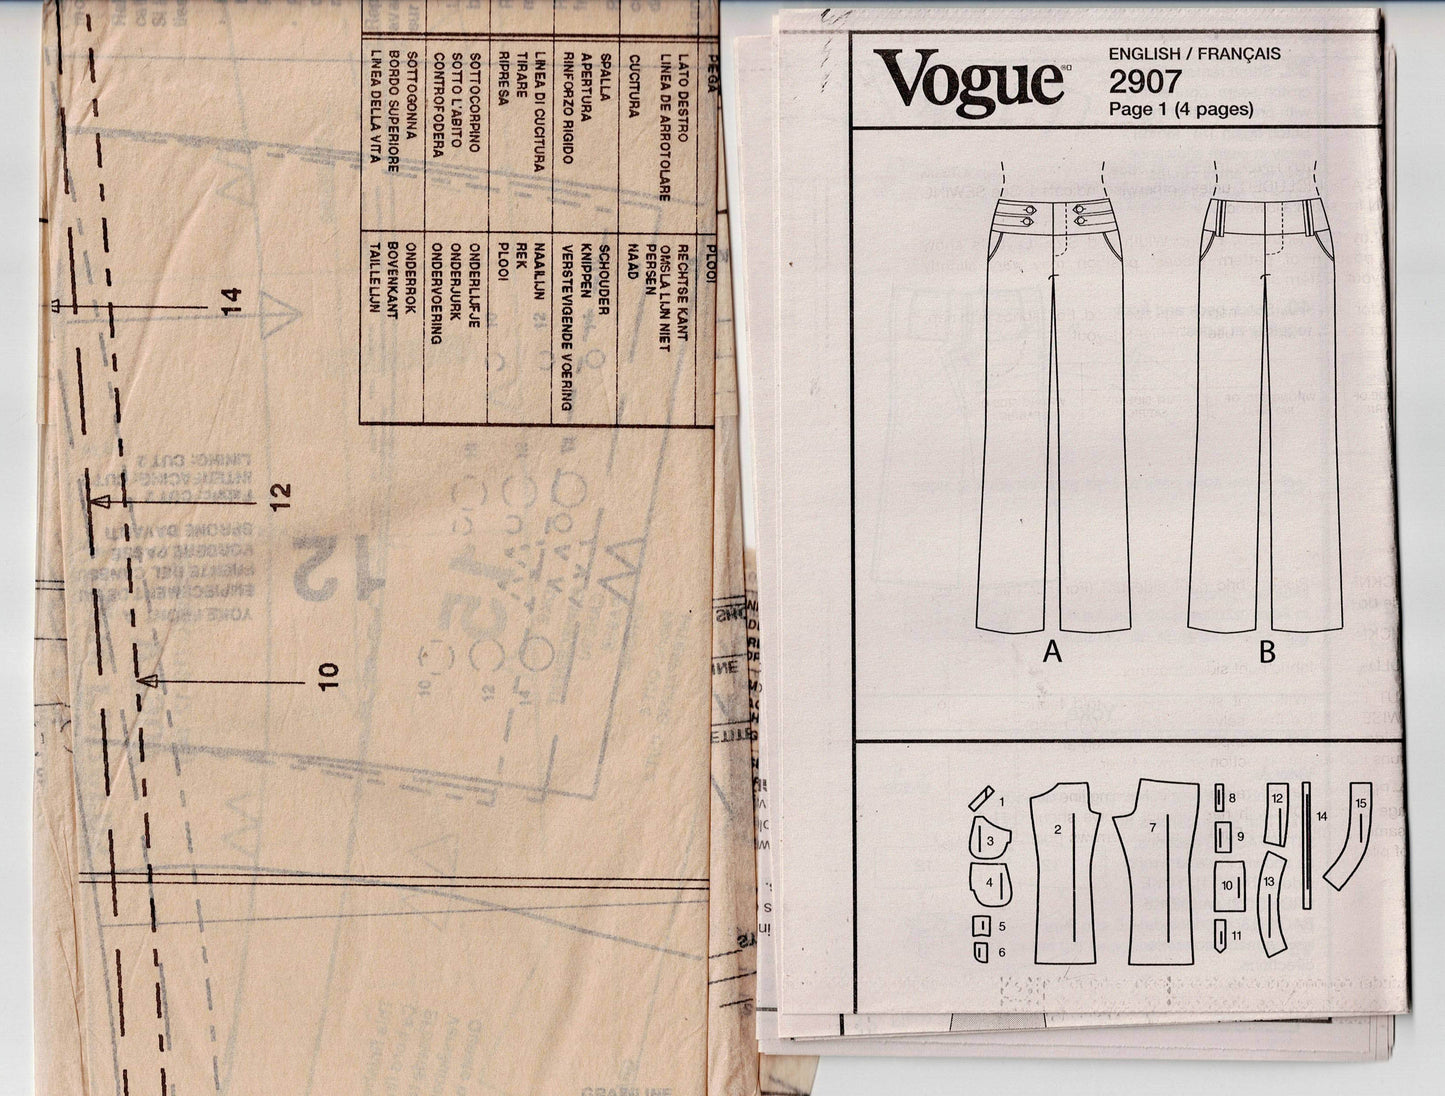 Vogue American Designer V2907 ALICE + OLIVIA Womens Low Rise Hipster Flared Pants Out Of Print Sewing Pattern Size 4 - 8 or 10 - 14 UNCUT Factory Folded